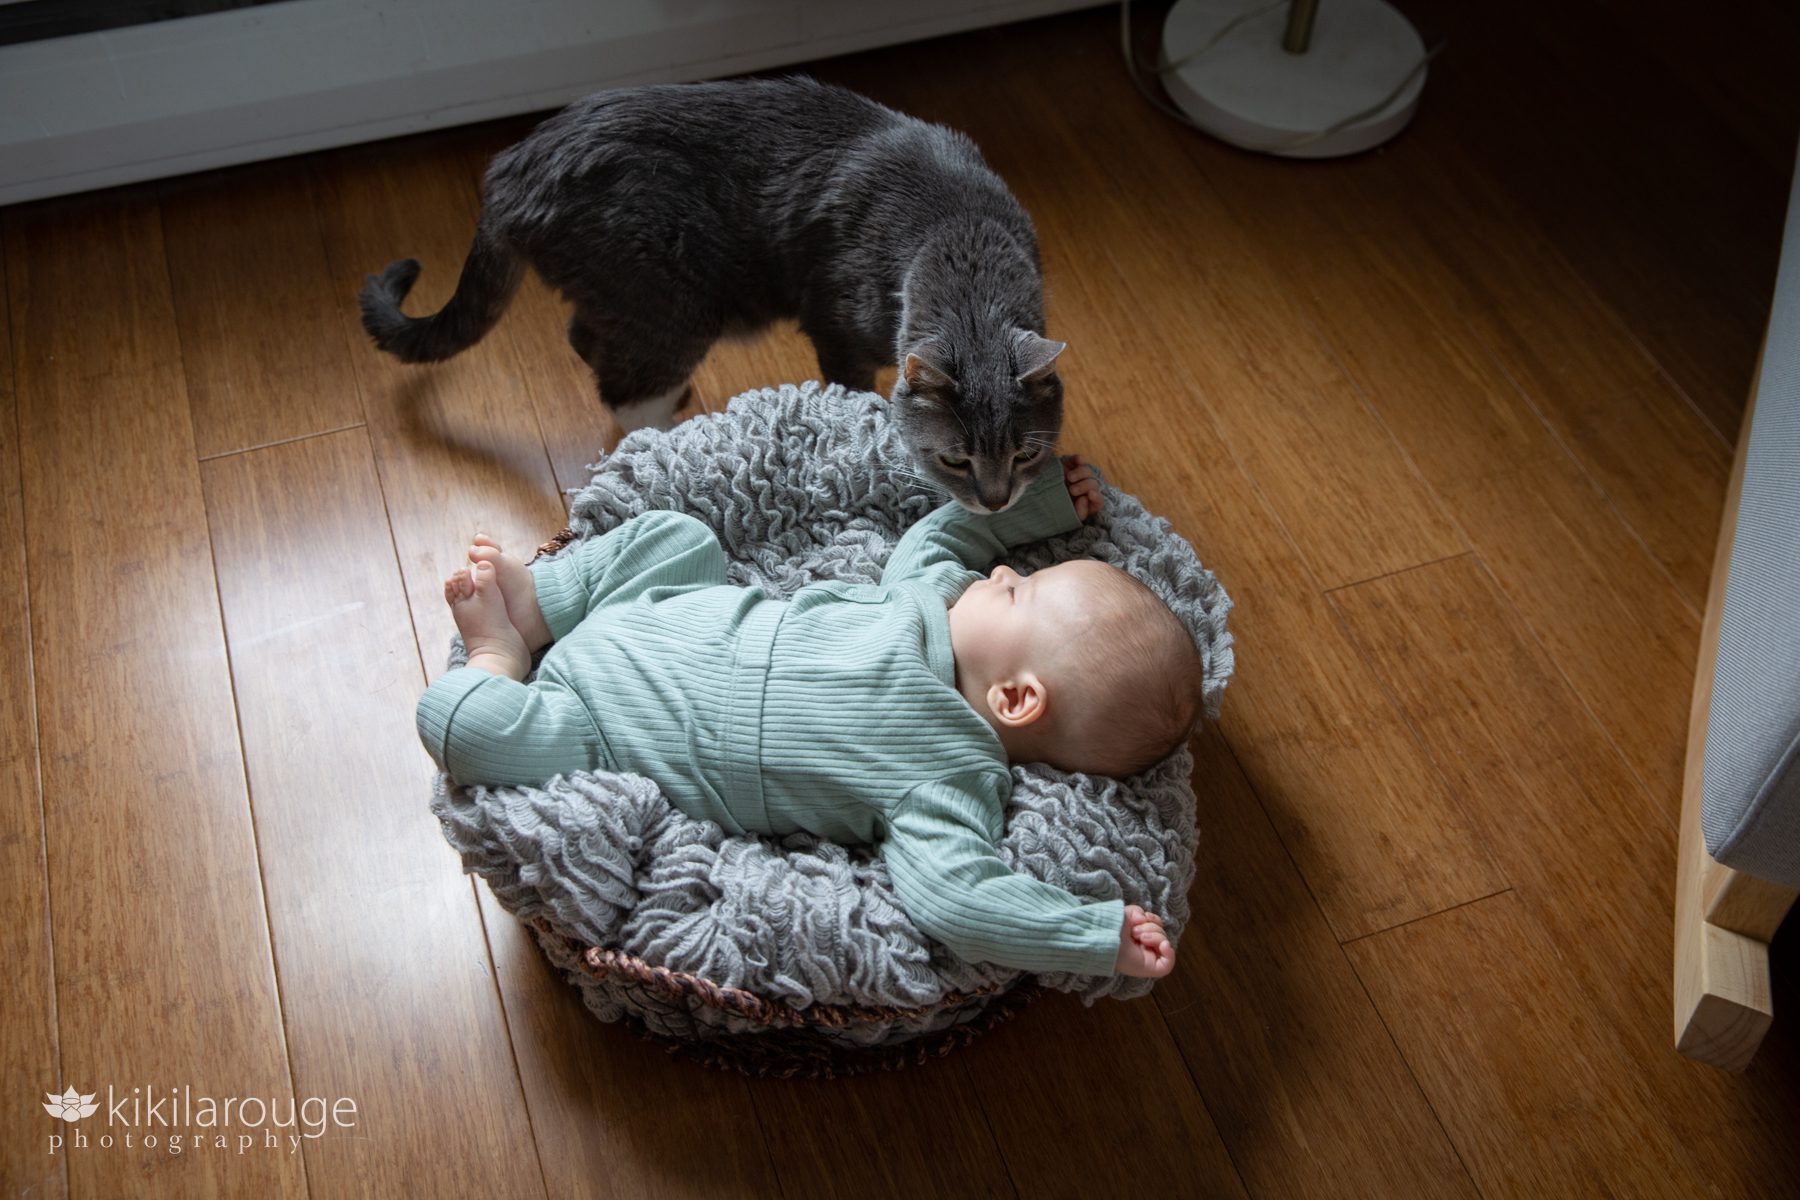 Gray cat checking out sleeping baby in basket on the floor